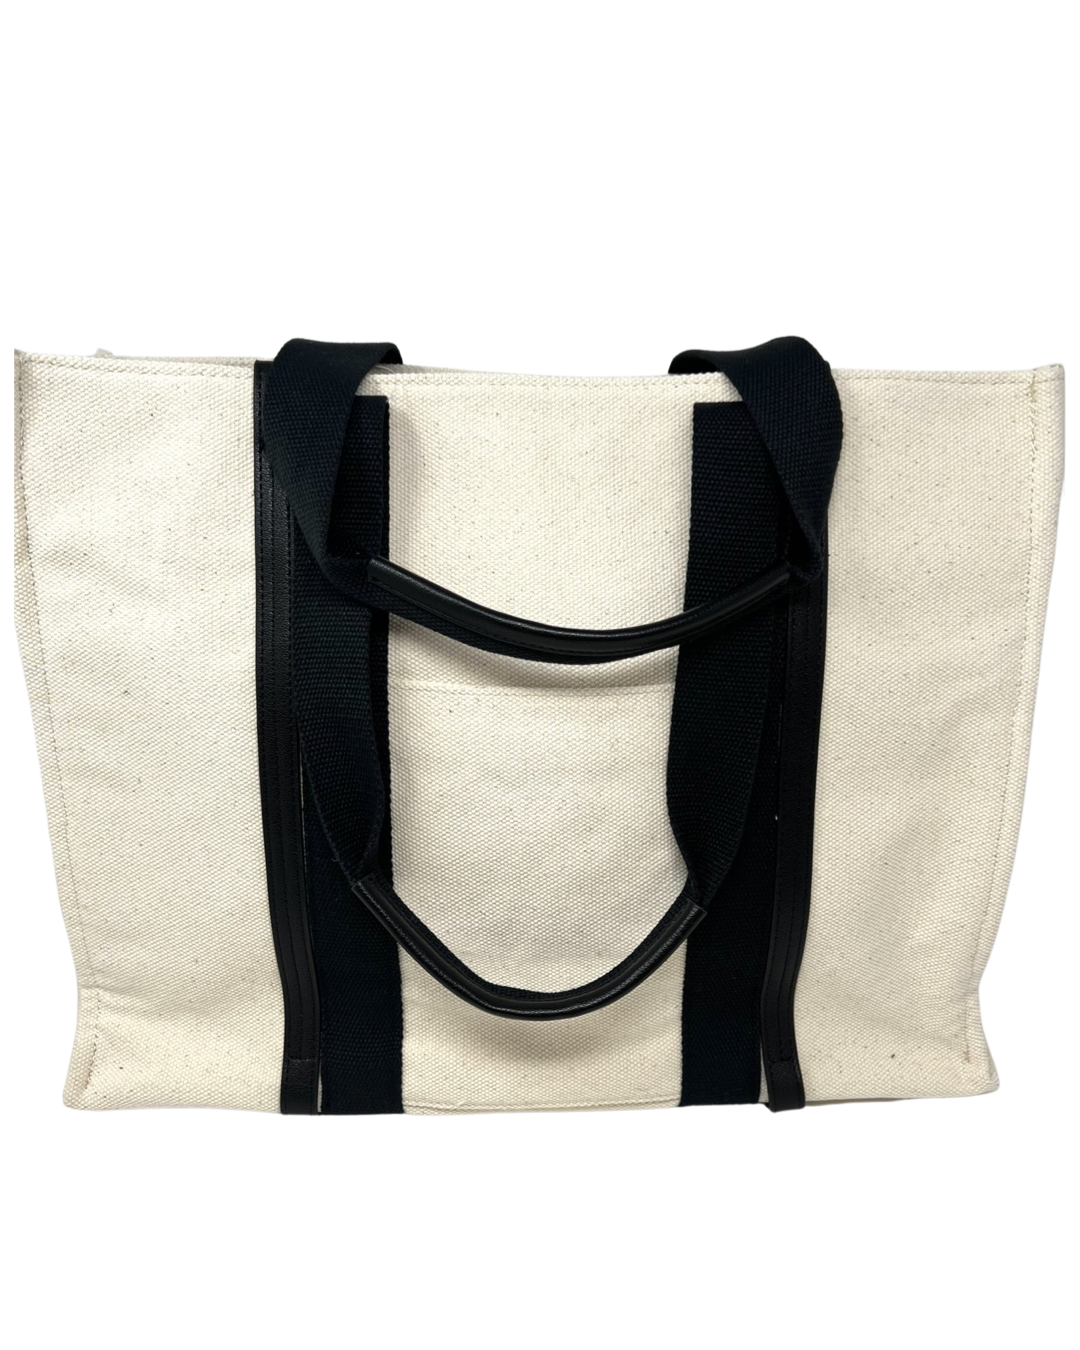 Chlo Chlo Canvas and Leather Tote in Black